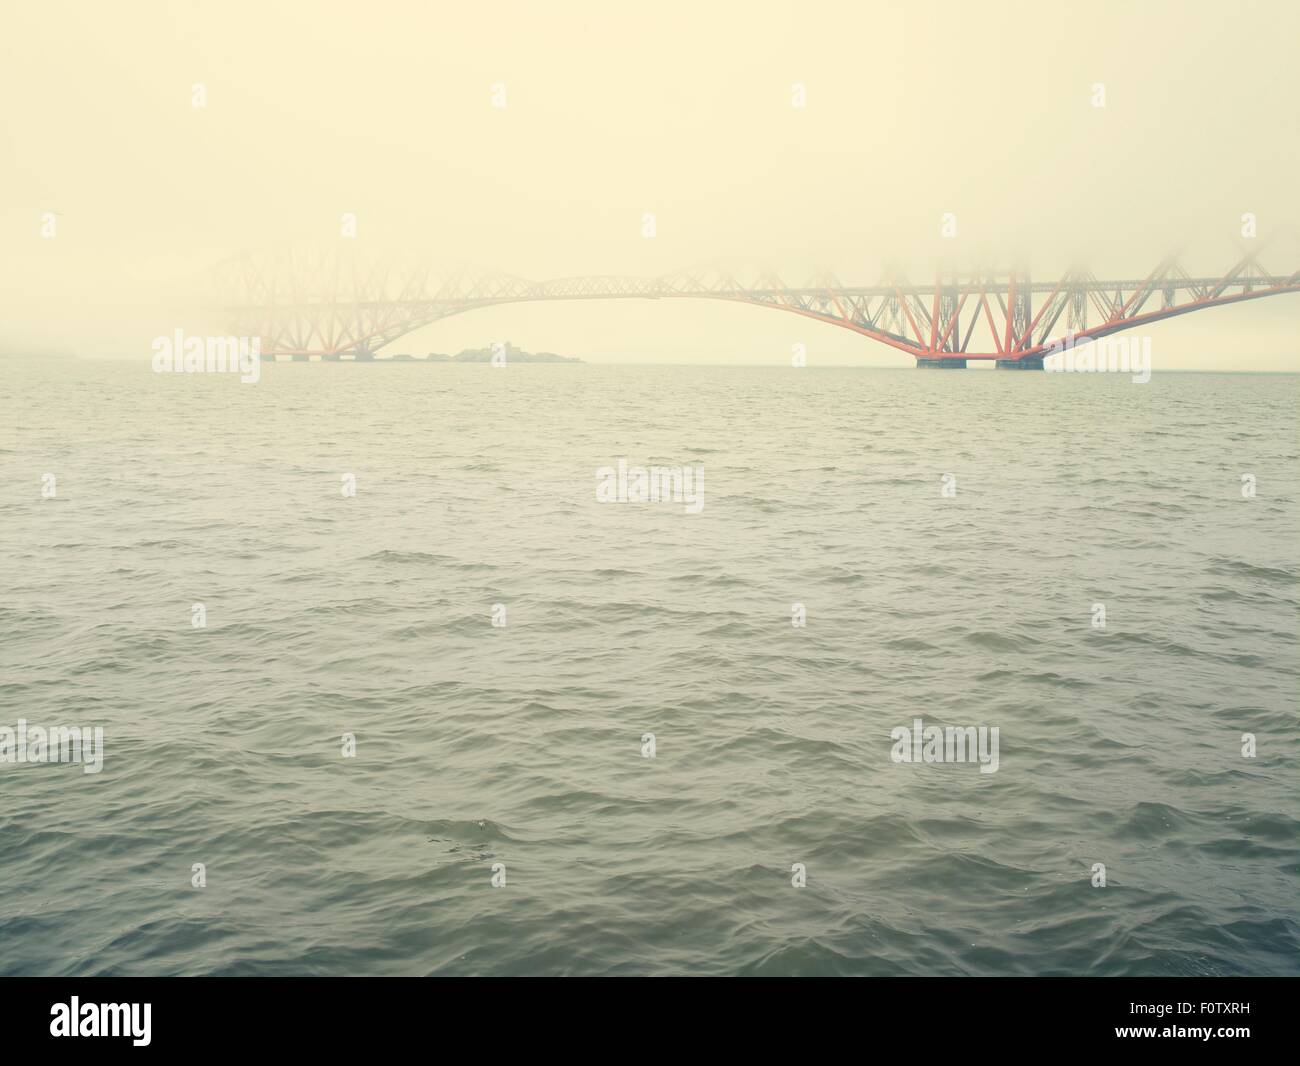 Misty view of Forth rail bridge, South Queensferry, Scotland, UK Stock Photo